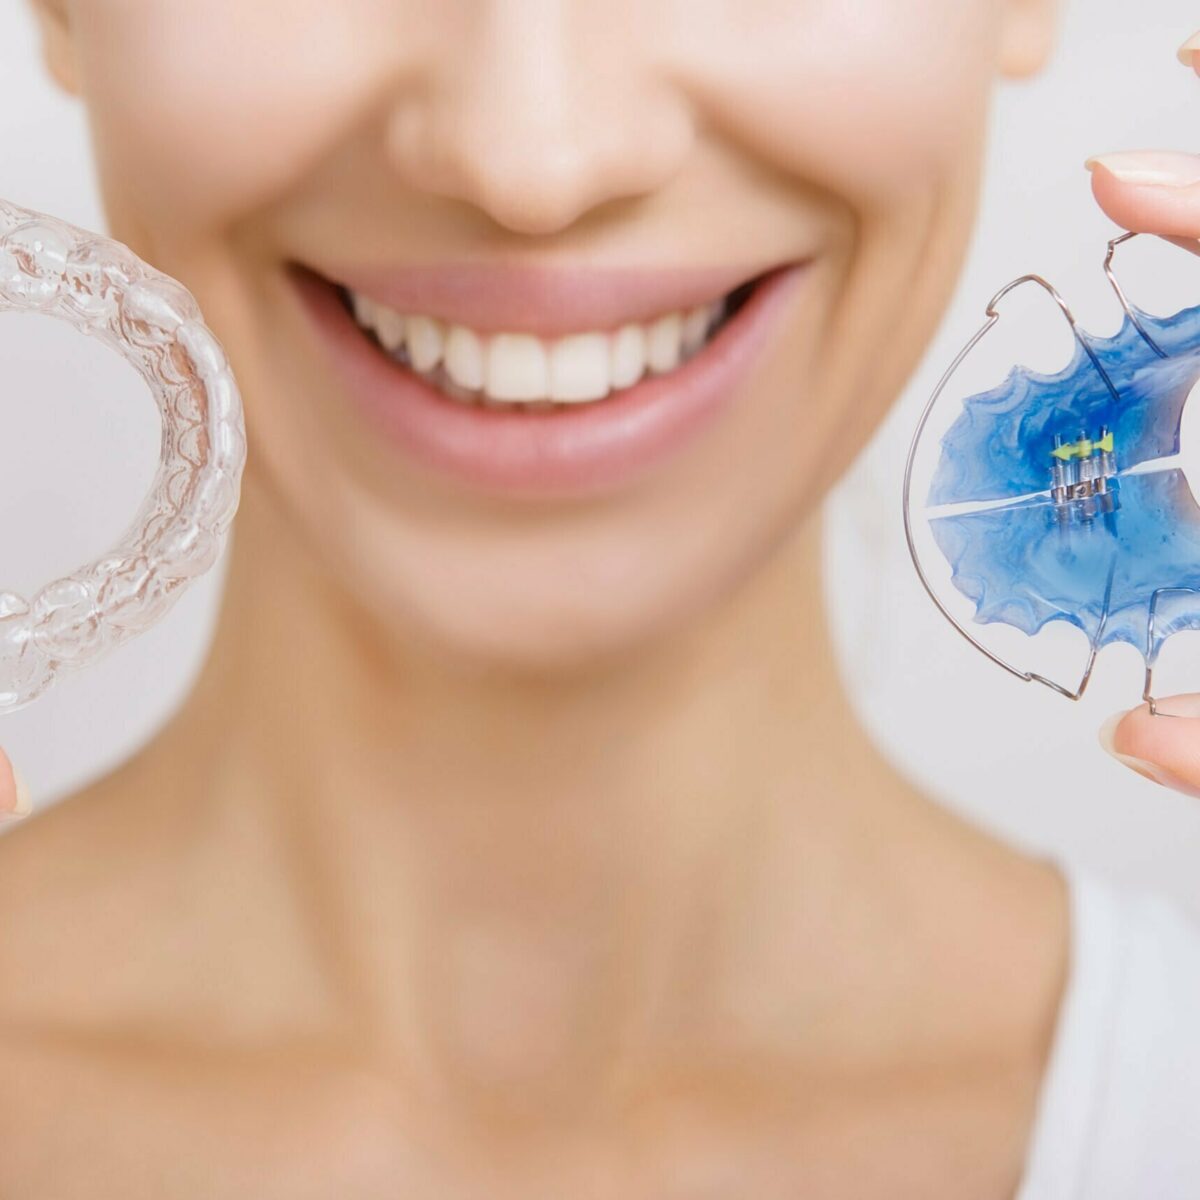 Do I need to wear retainers forever? Essix retainers, Hawley retainers, Brace aftercare, Orthodontics, dentalbox